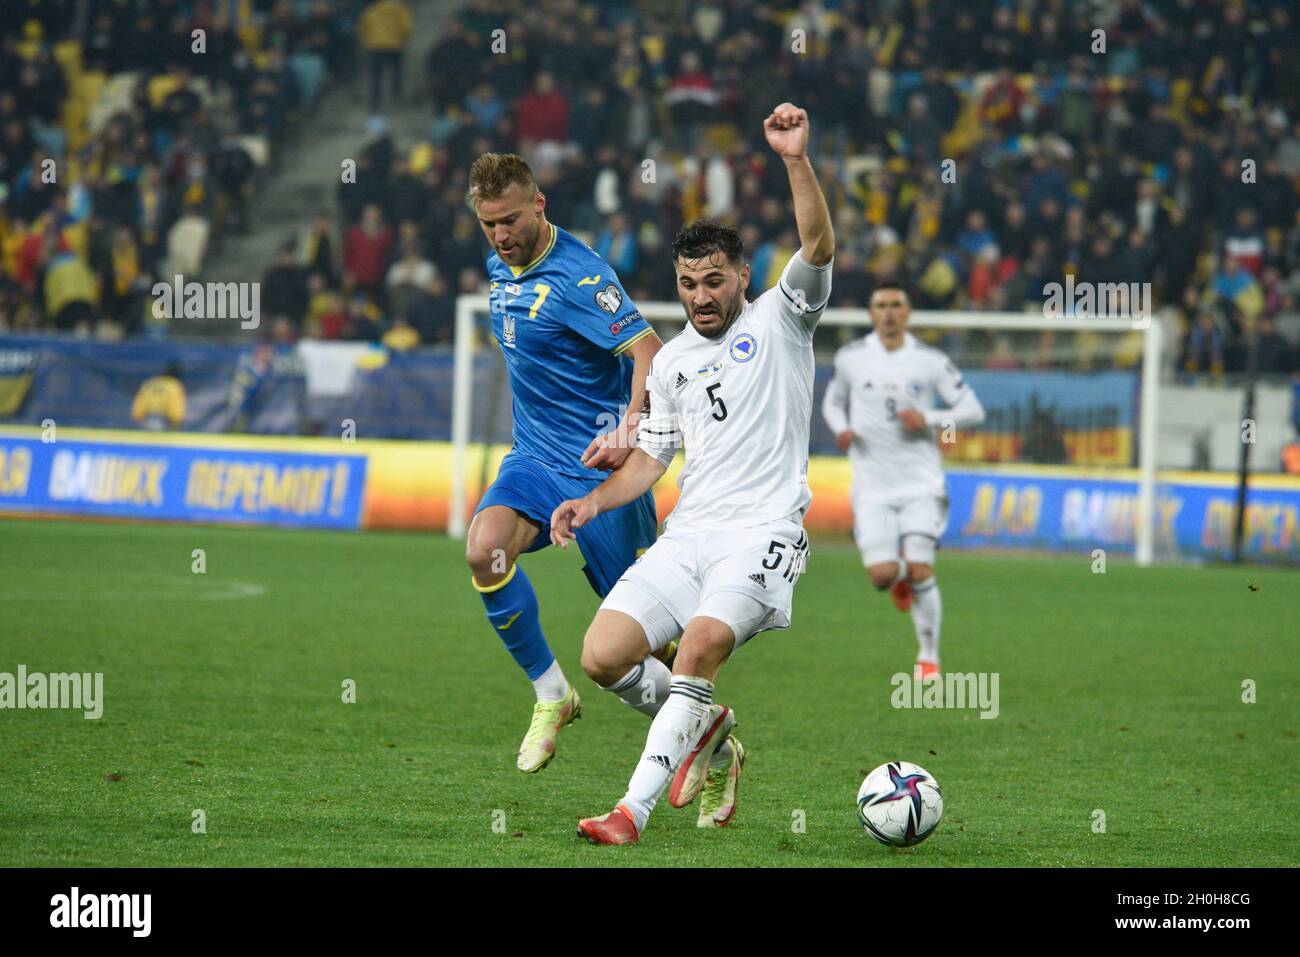 LVIV, UKRAINE - OCTOBER 12, 2021 - Players of the national team of Ukraine Andrii Yarmolenko (R) and Bosnia and Herzegovina Sead Kolasinac fight for the ball during the 2022 FIFA World Cup qualifying matchday 8 game which ended in a draw 1:1, Lviv, western Ukraine Stock Photo